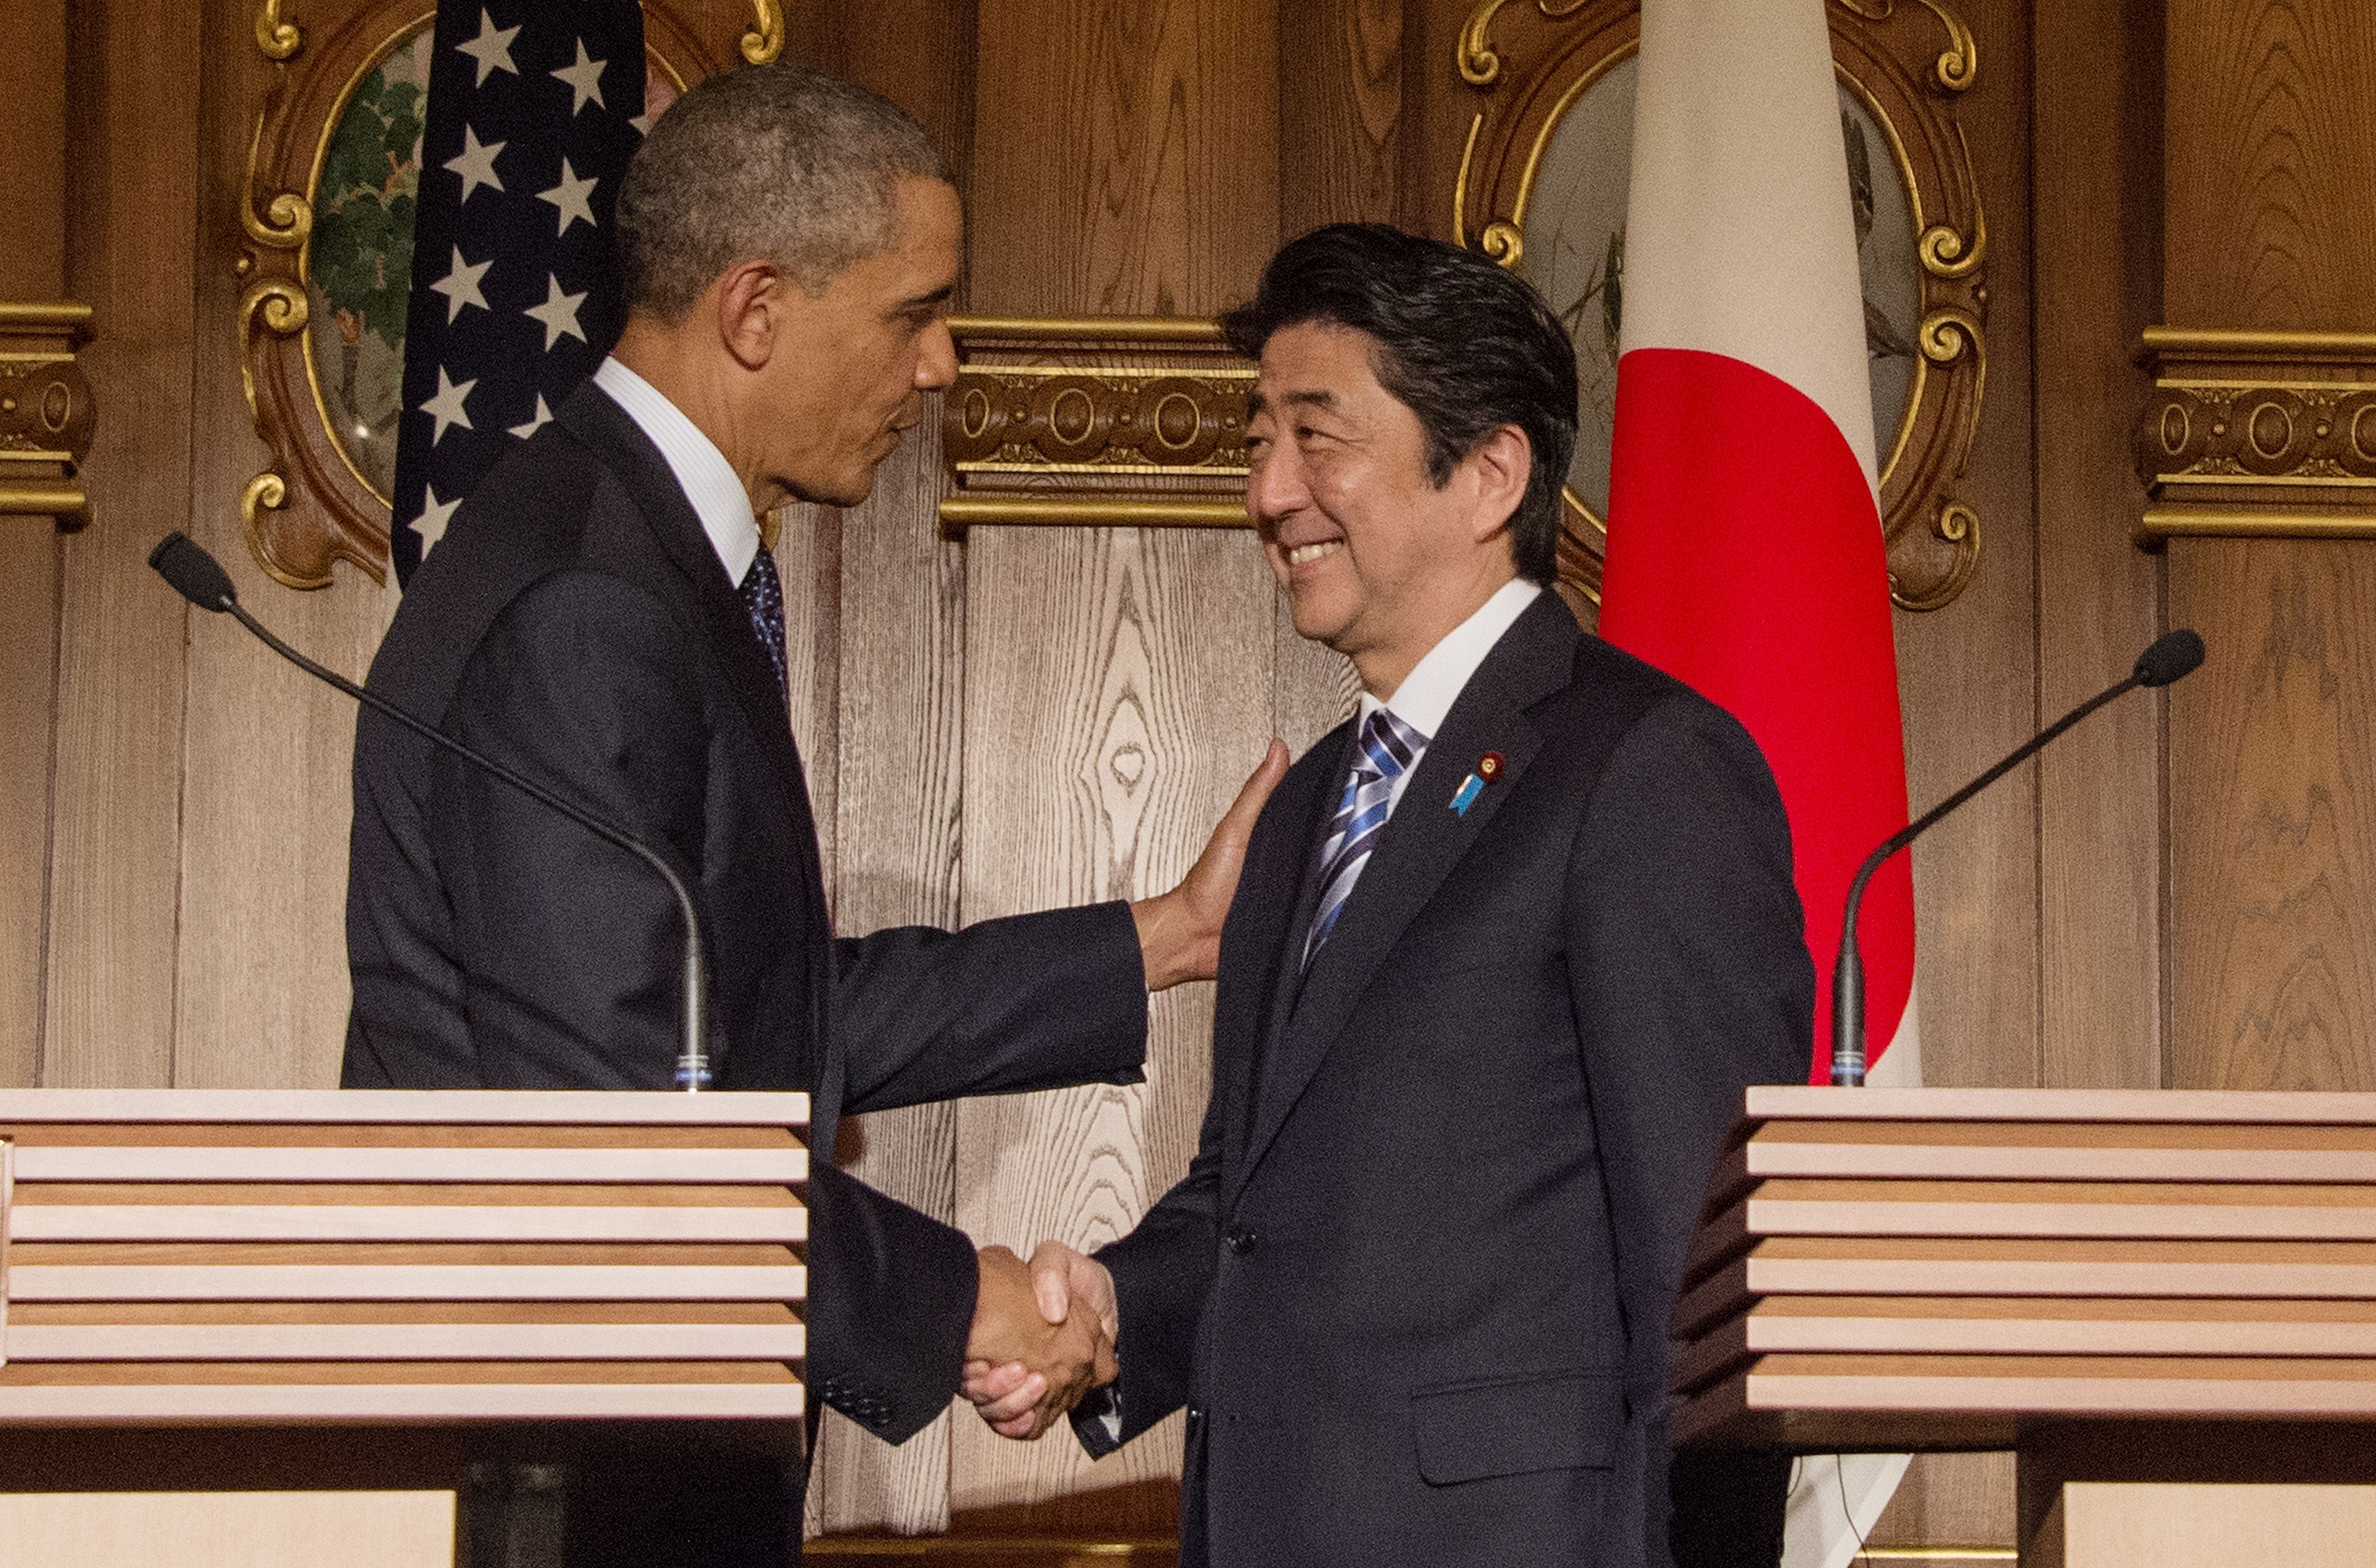 President Barack Obama shakes hands with Japanese Prime Minister Shinzo Abe following a bilateral press conference at the Akasaka Palace in Tokyo on April 24, 2014 (Jim Watson—AFP/Getty Images)